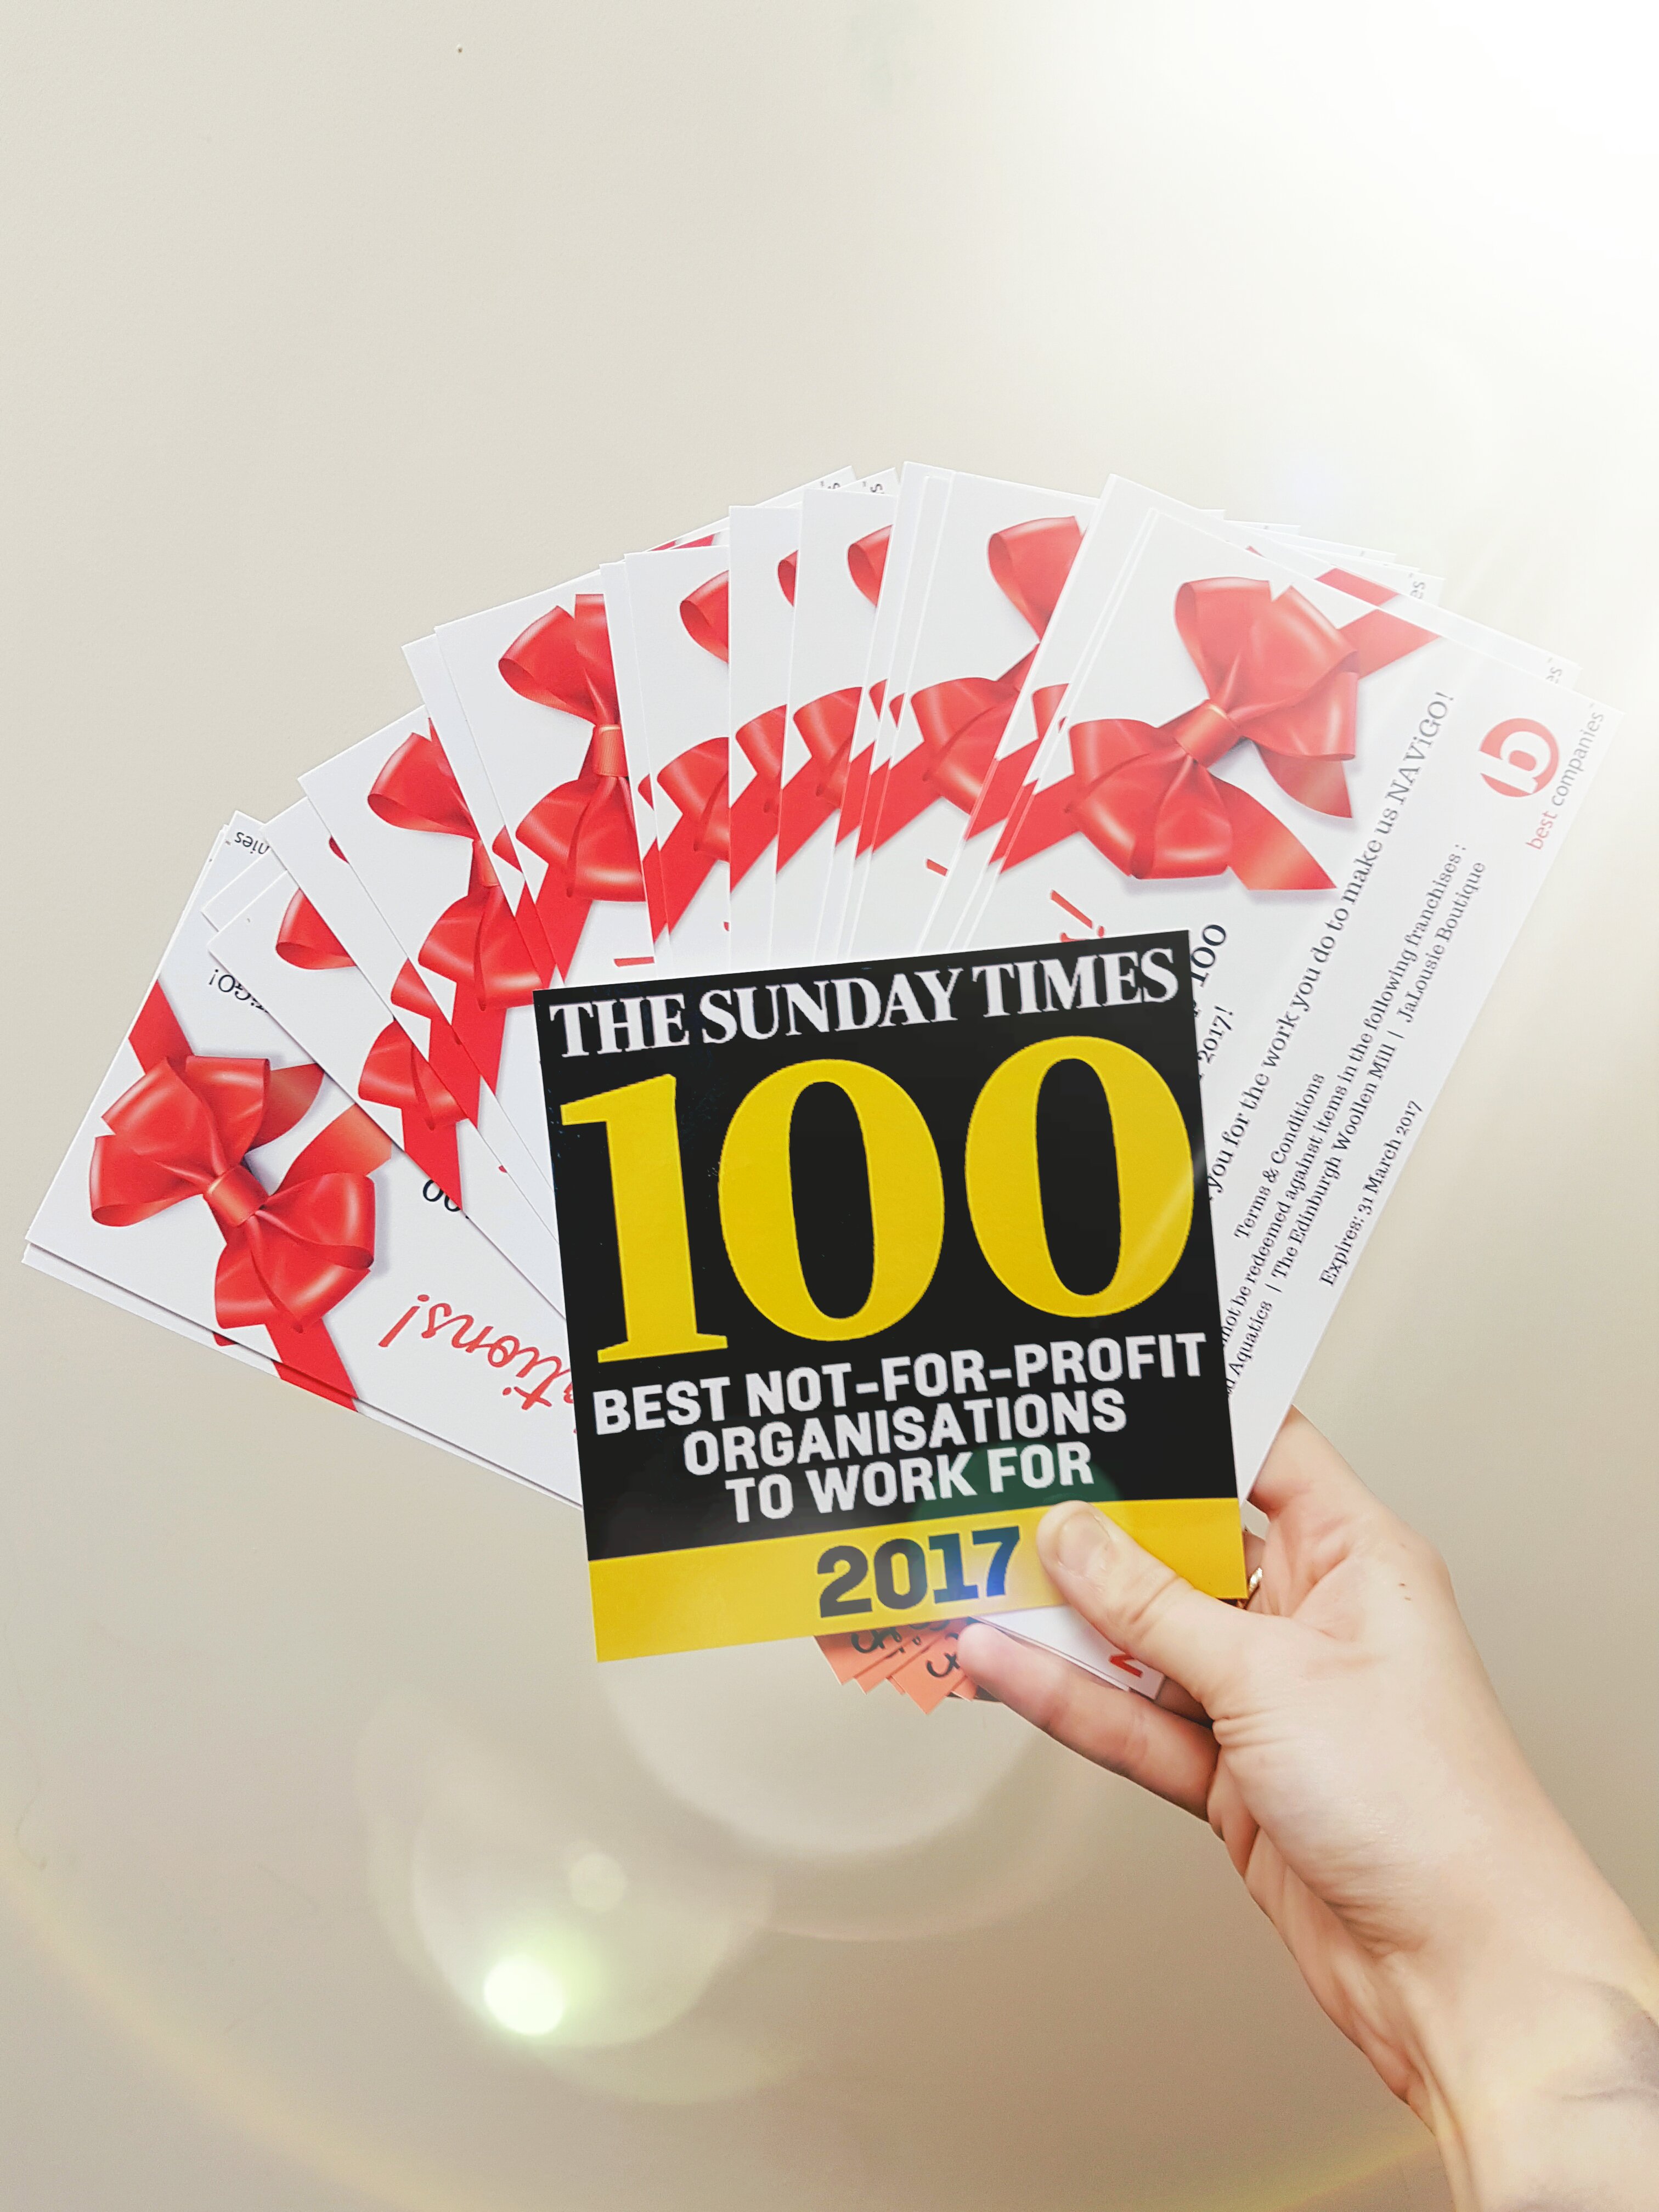 NAViGO secures place in The Sunday Times Top 100 Not-For-Profit Organisations to work for 2017 featured image